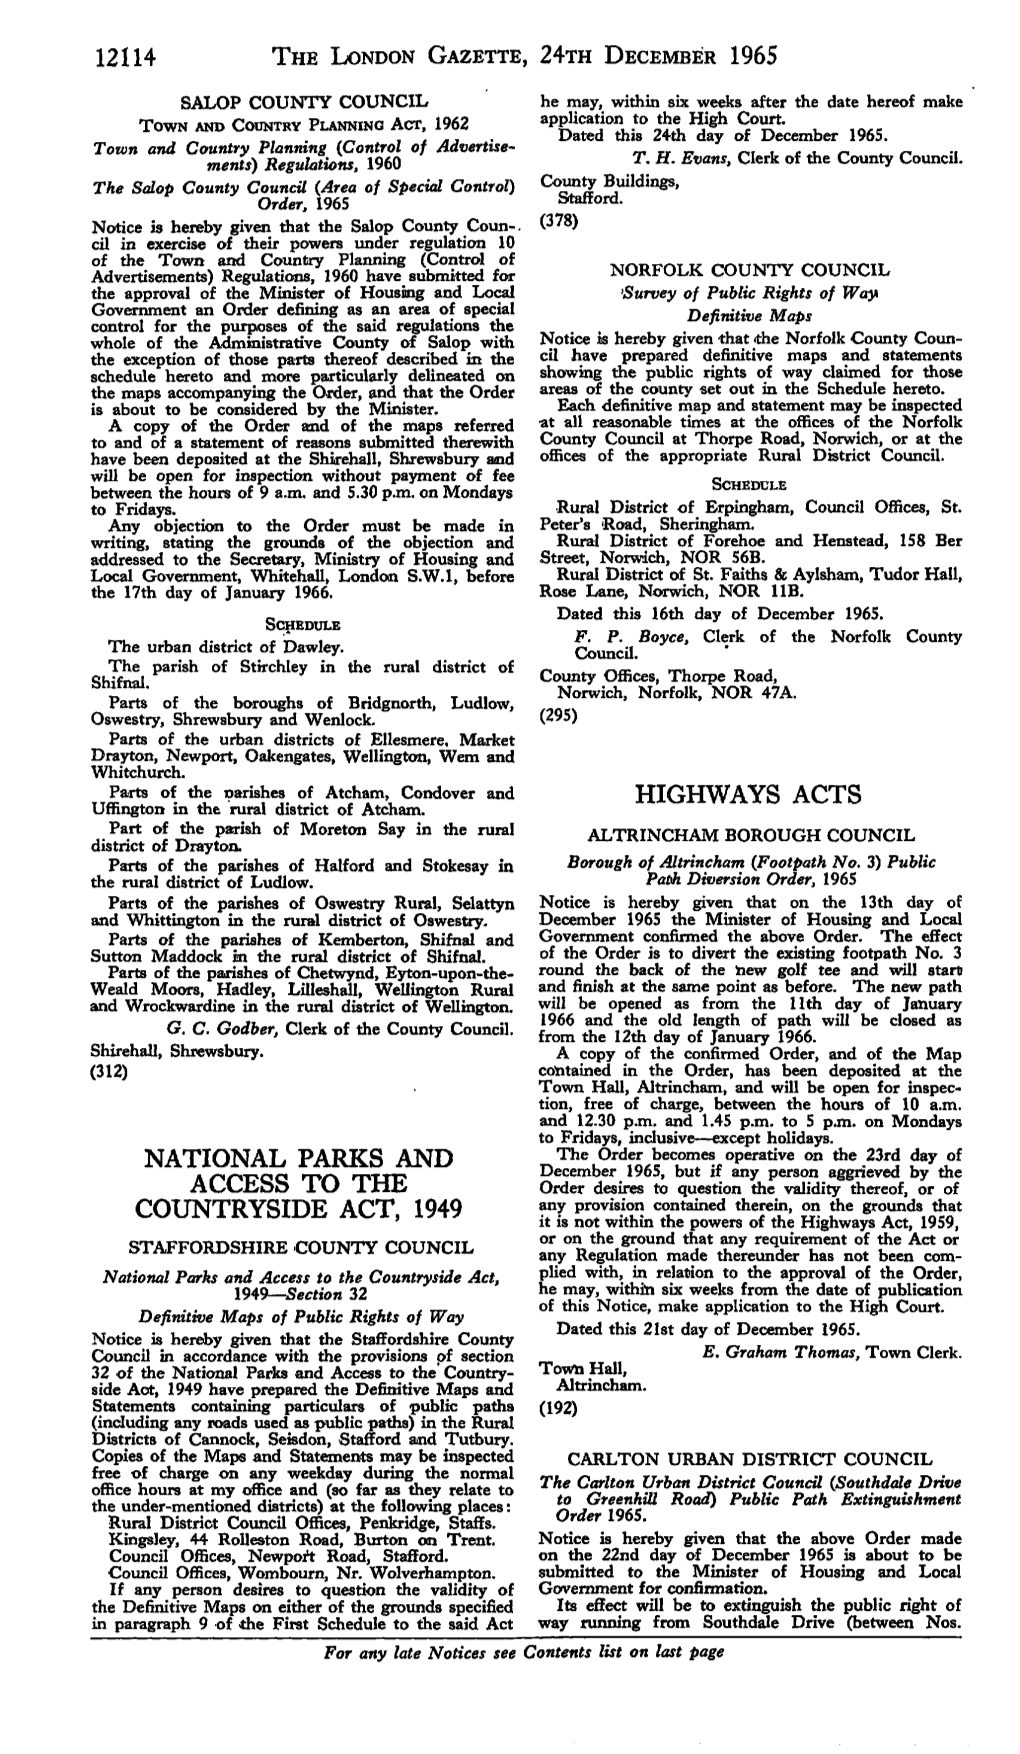 National Parks and Access to the Countryside Act, 1949